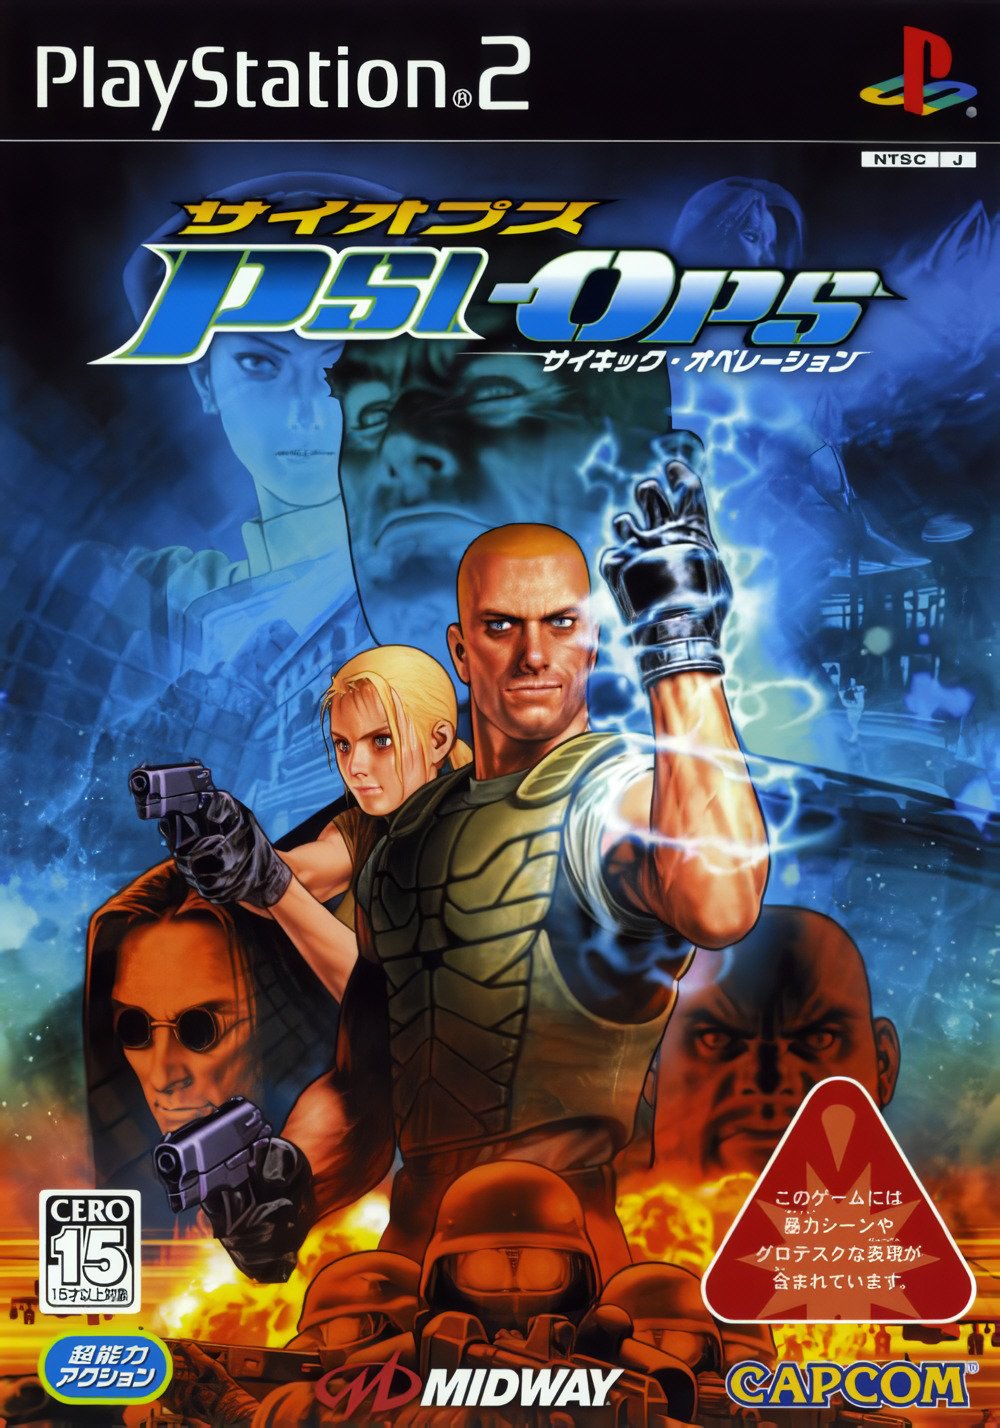 Psi-Ops: Psychic Operation